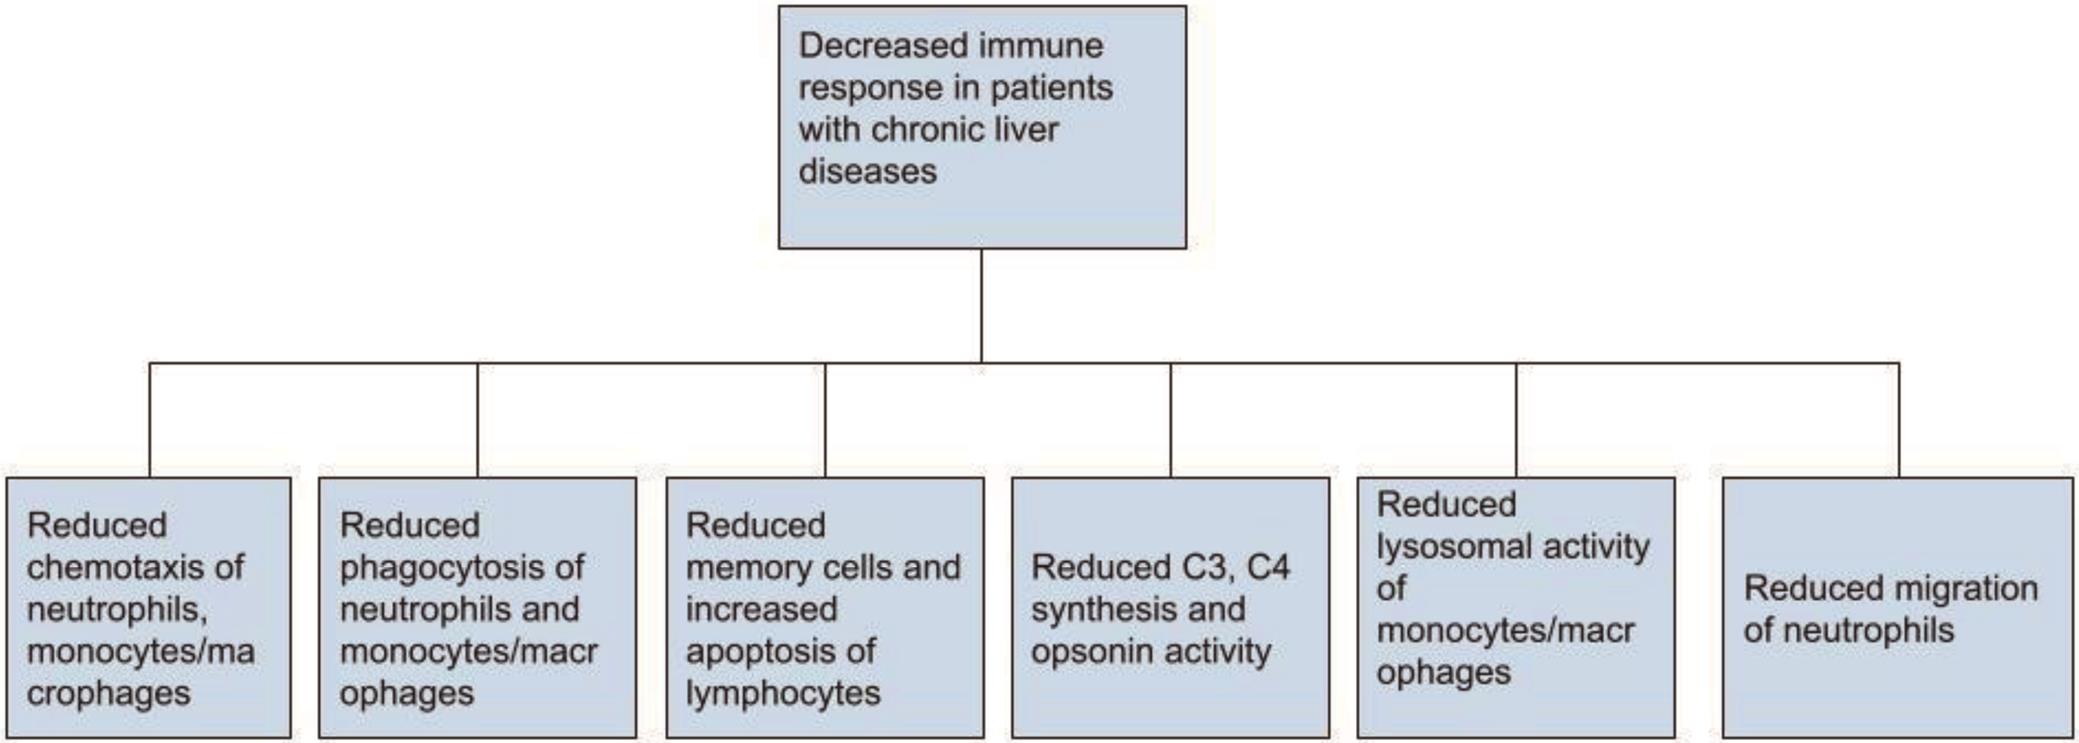 Mechanisms of reduced immune response in patients with chronic liver diseases.